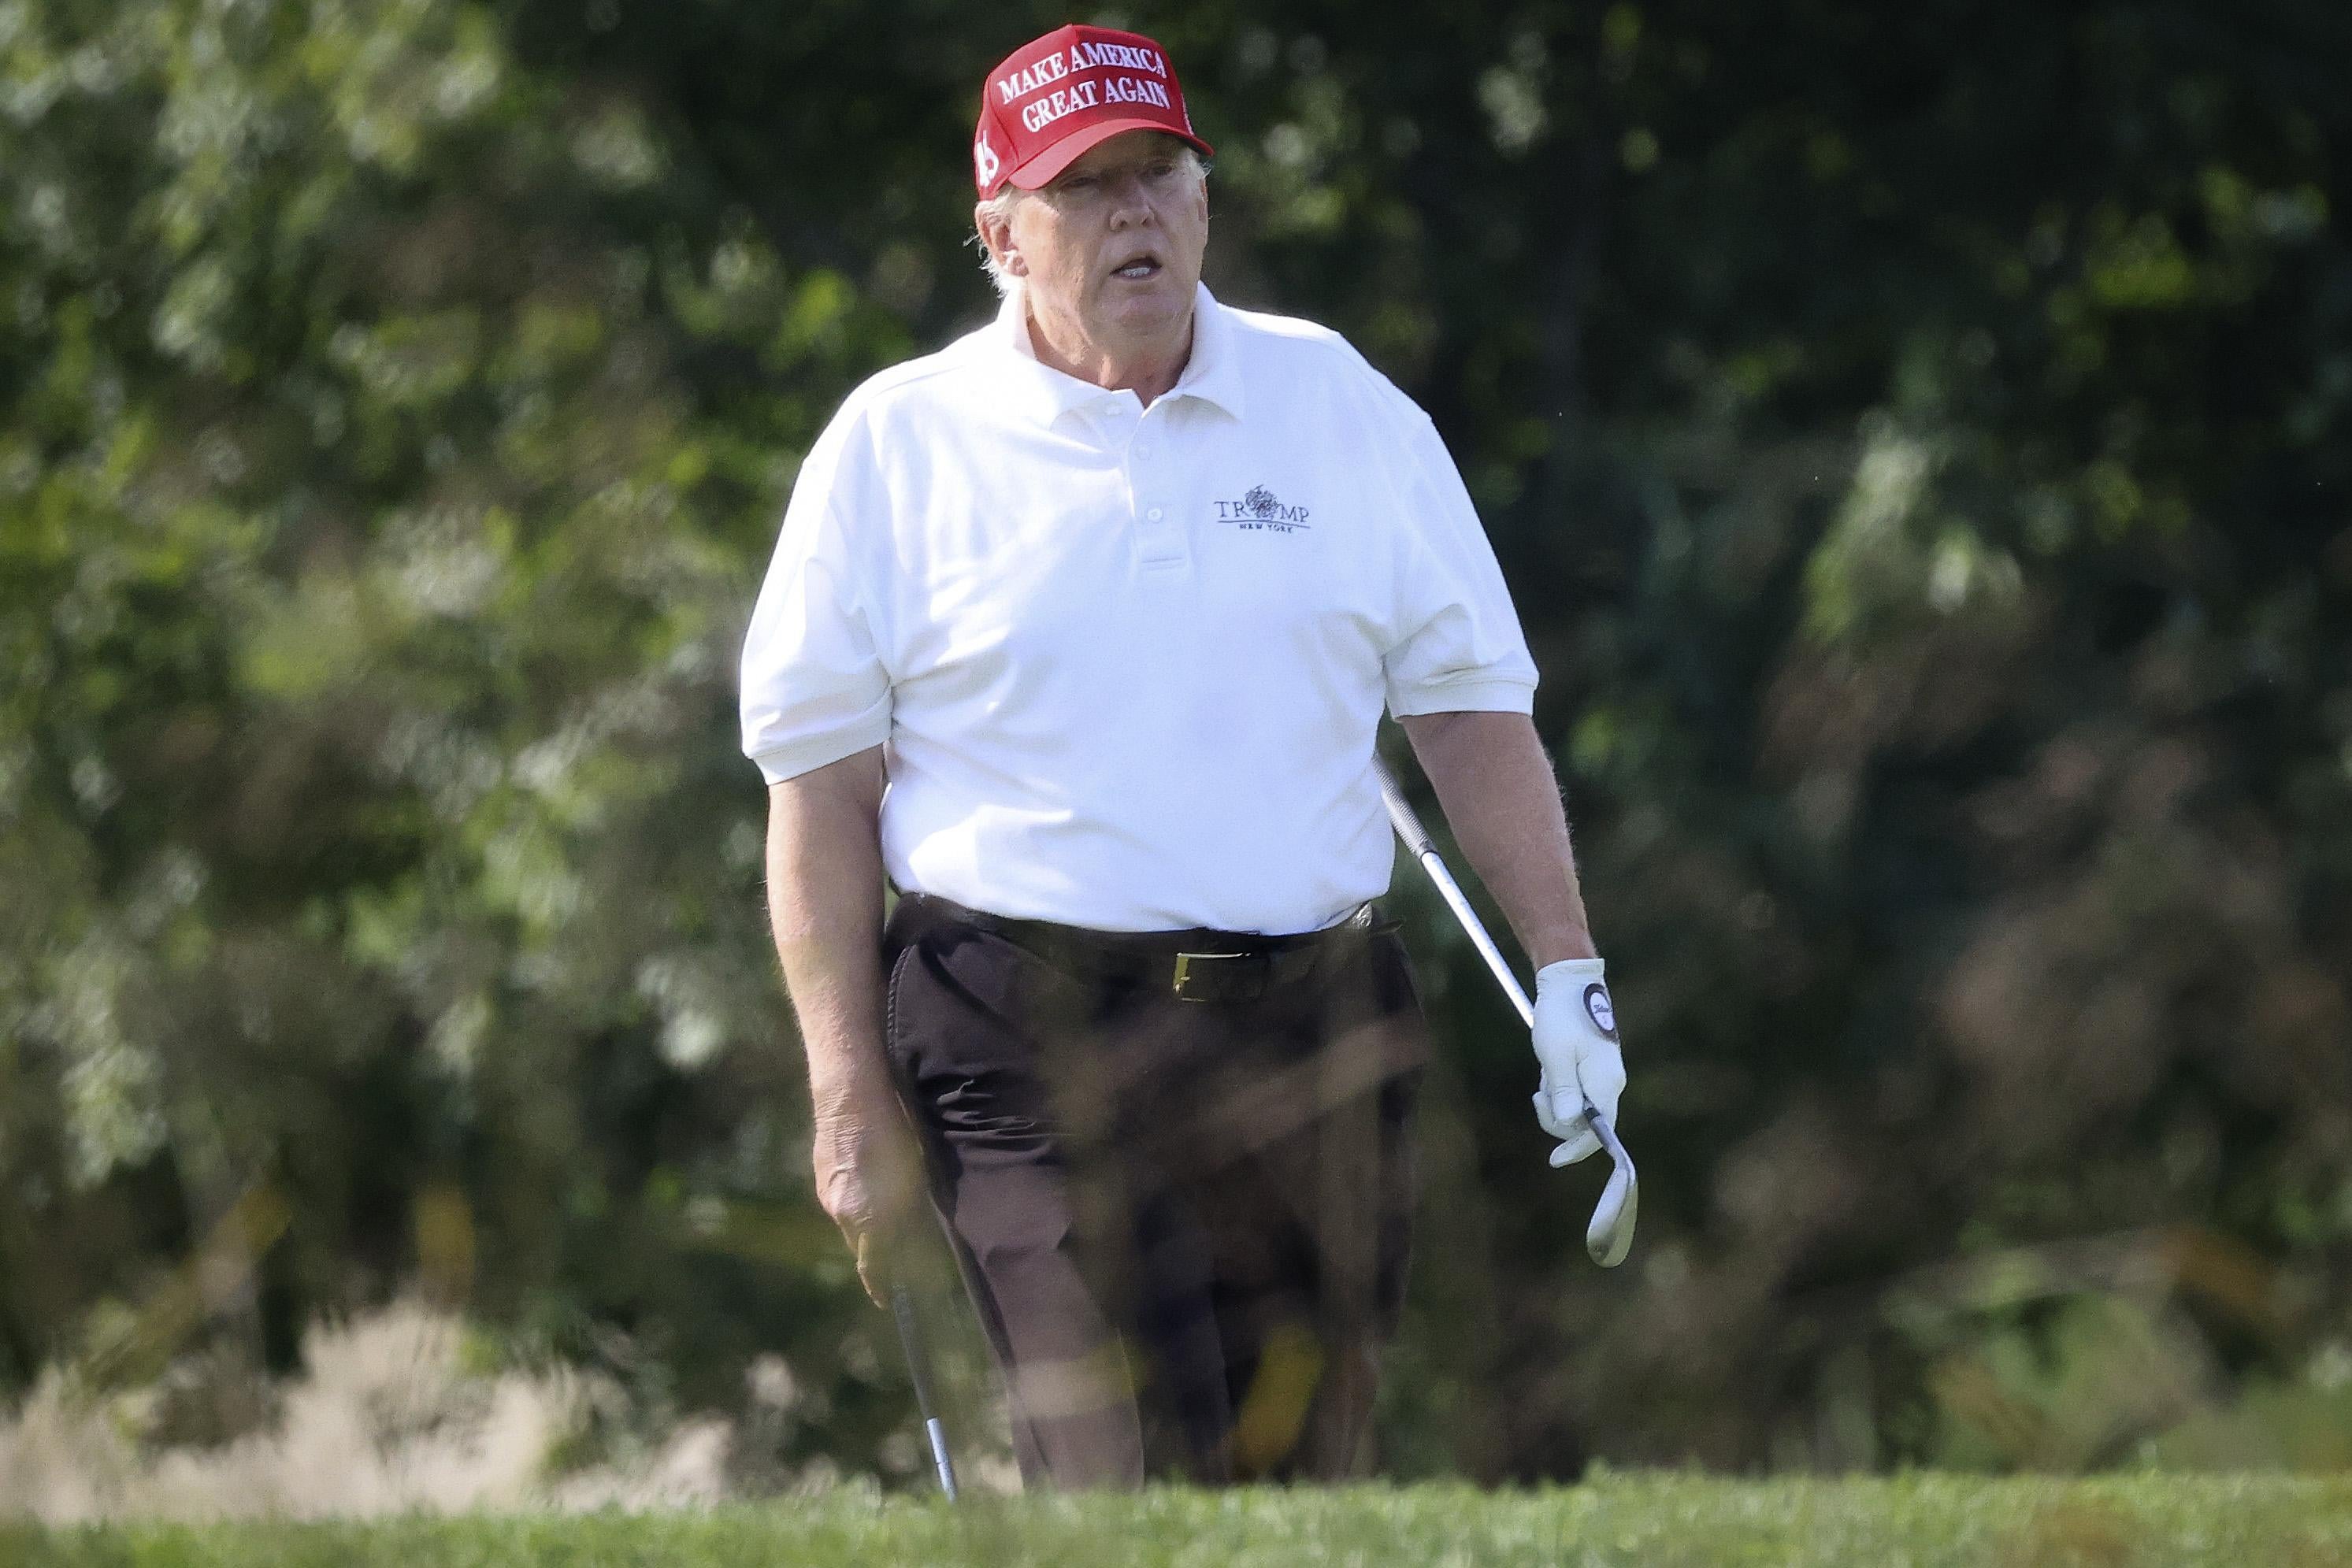 Donald Trump holding a golf club and wearing a MAGA hat, looking pretty terrible.